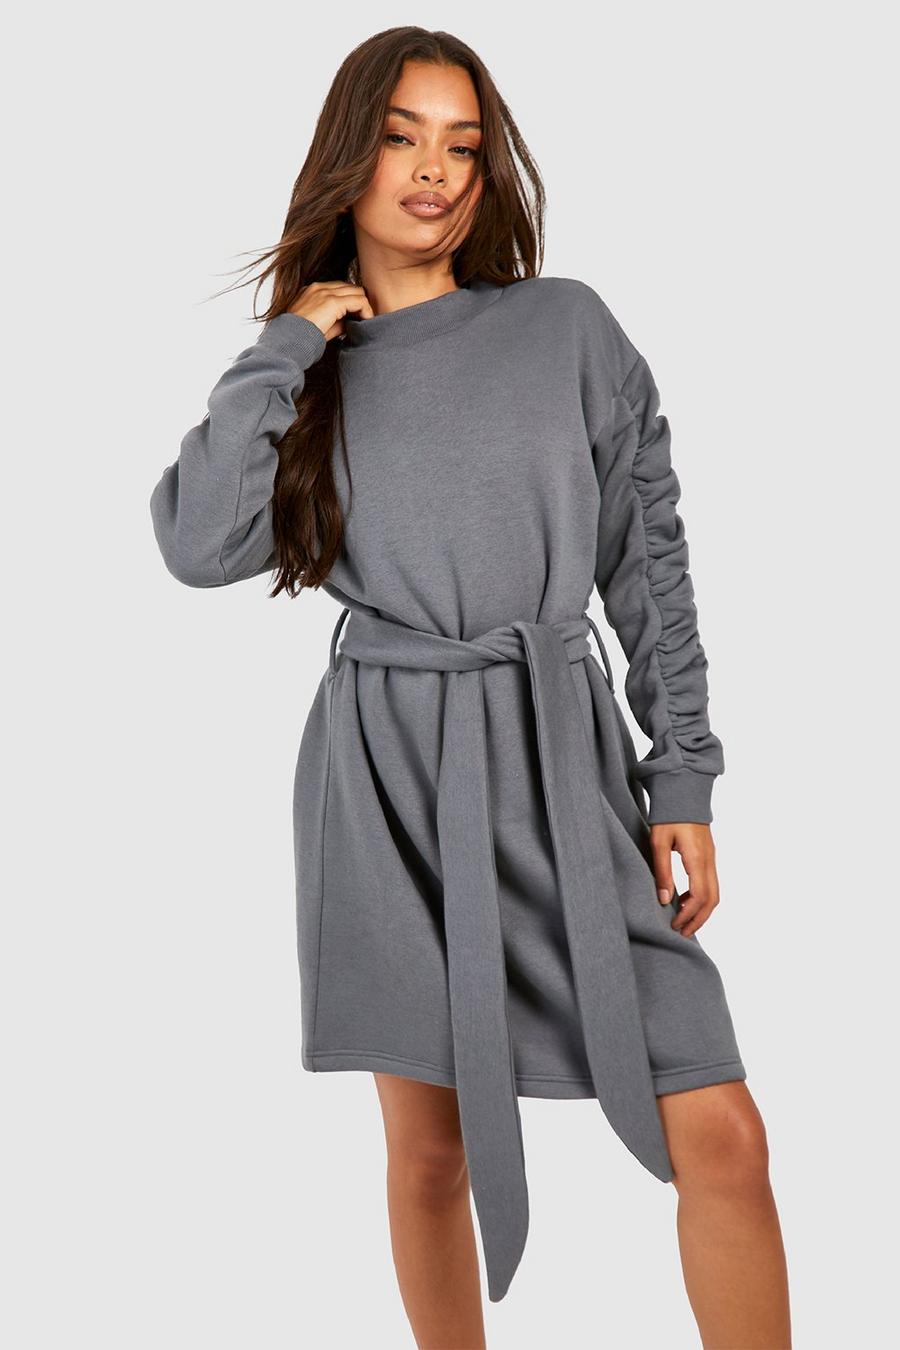 Charcoal Ruched Sleeve Sweater Dress